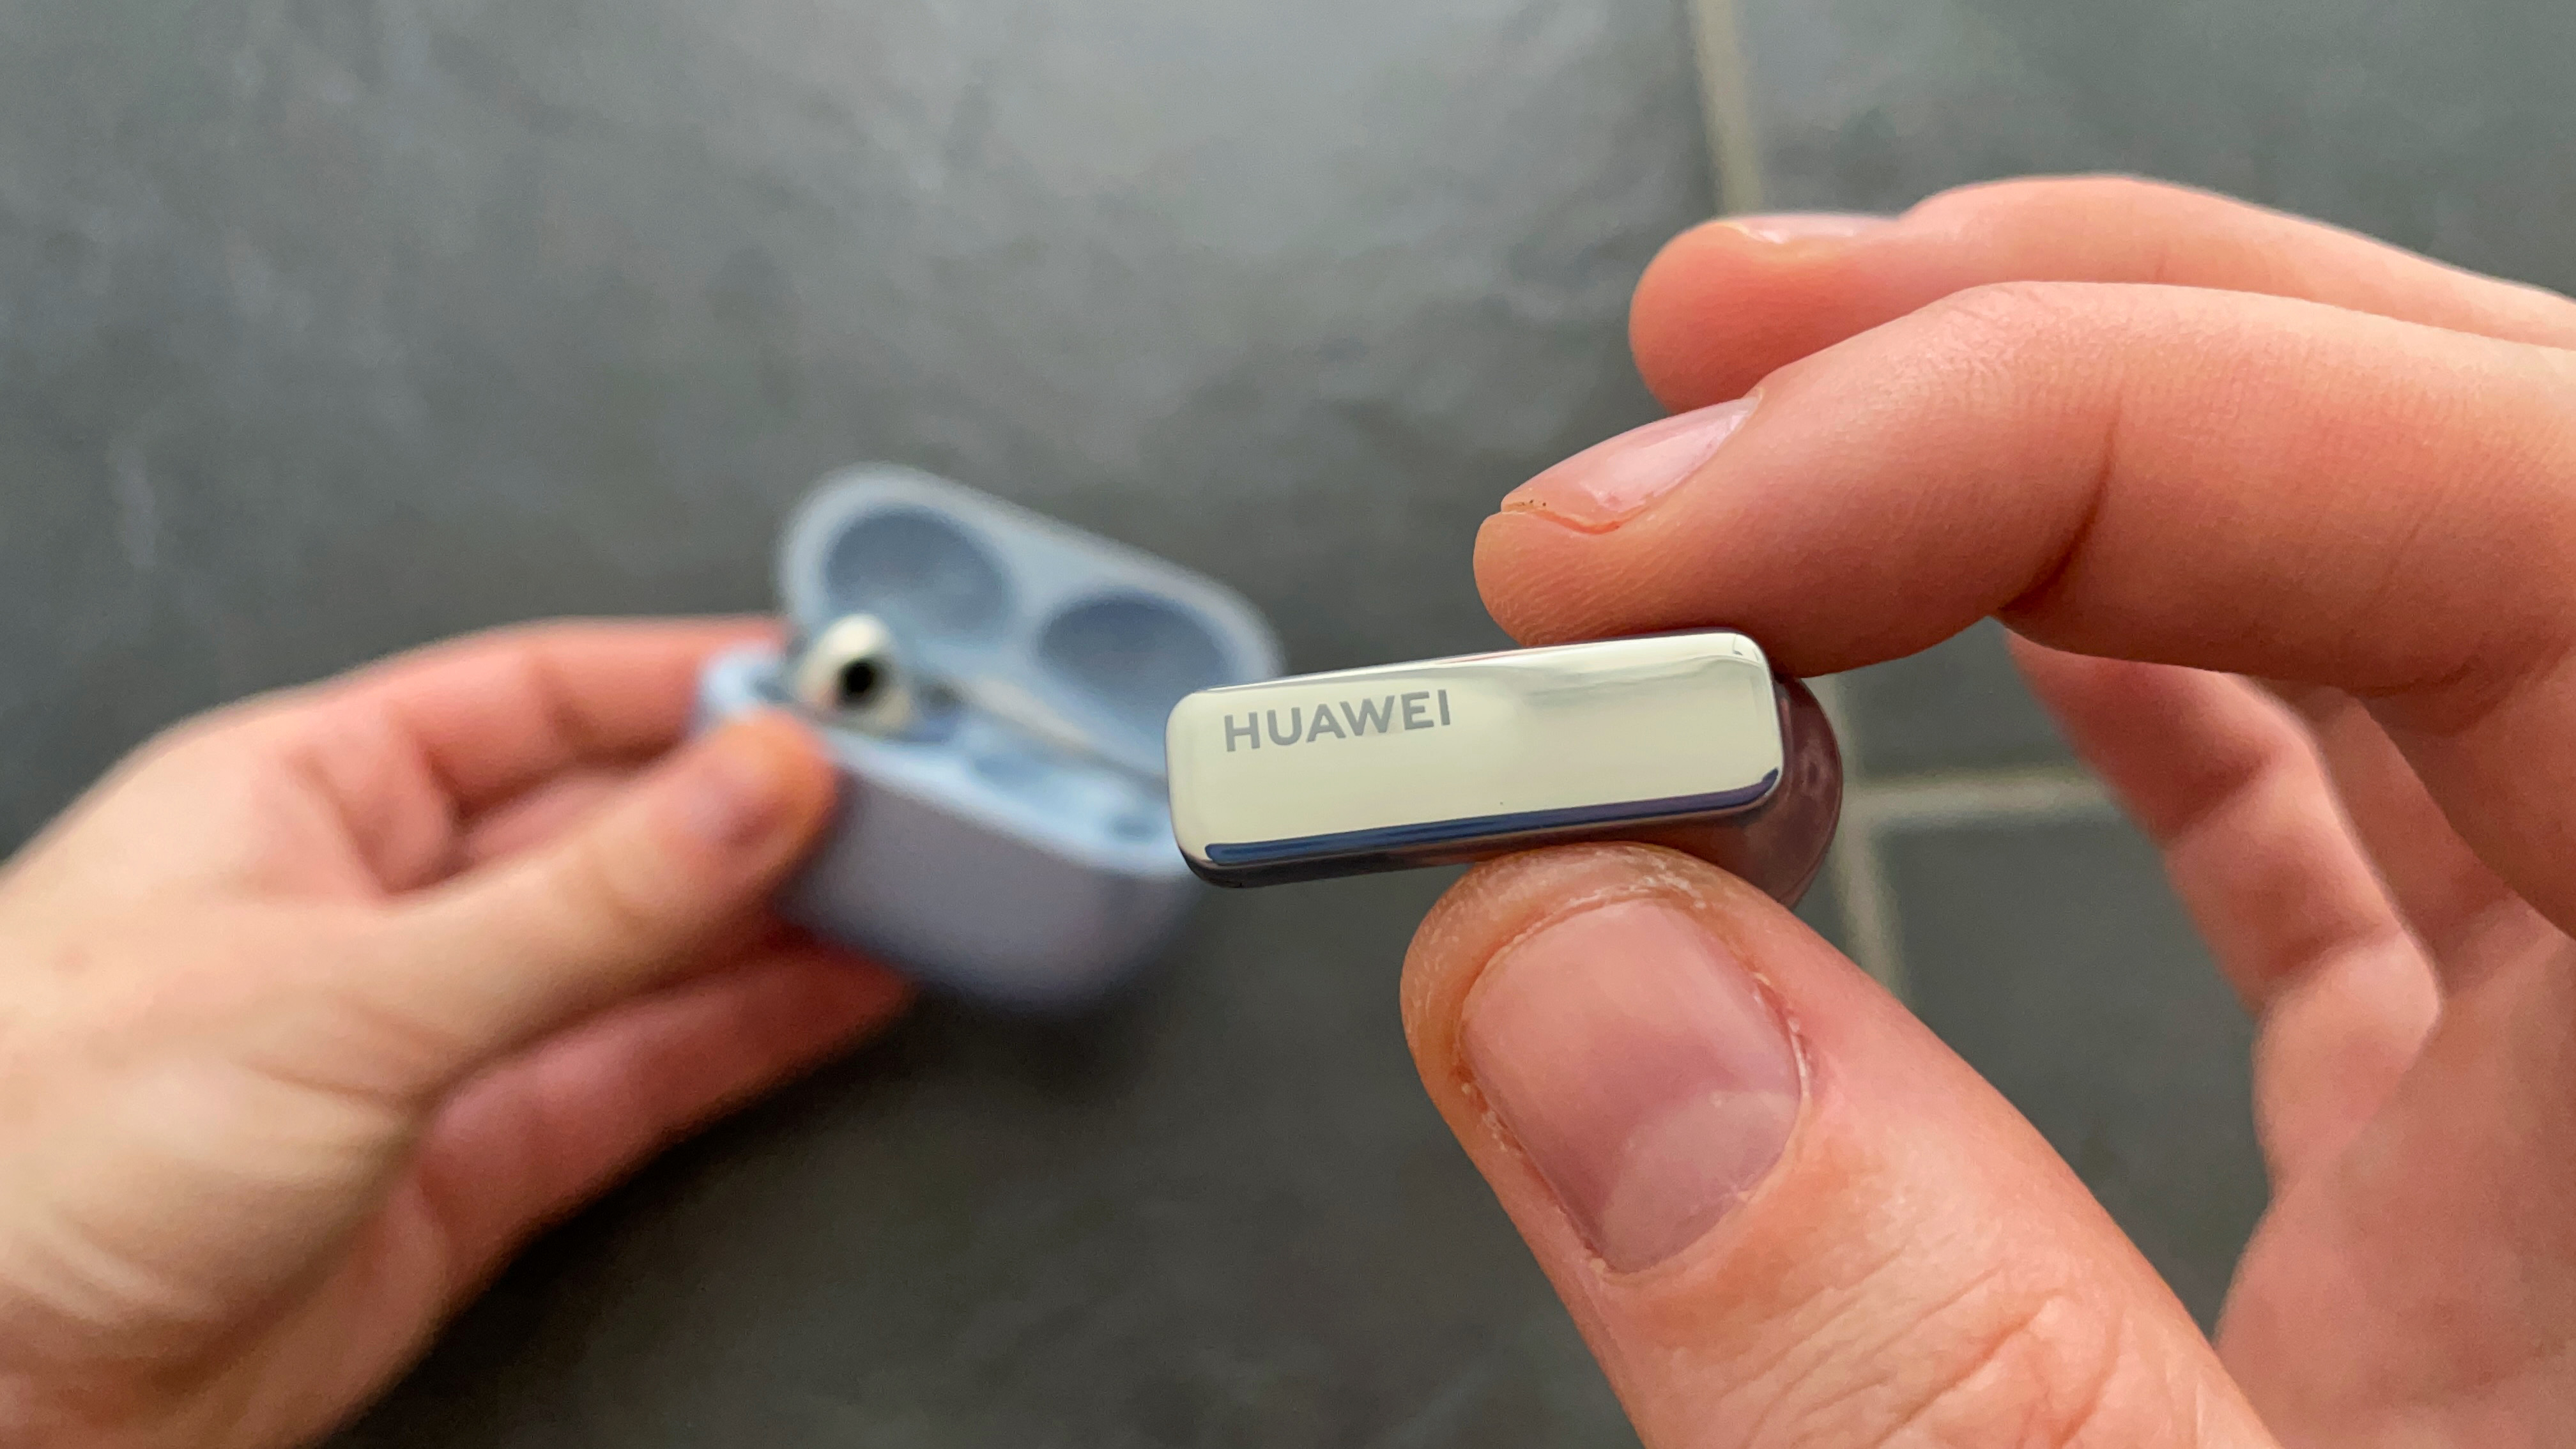 Huawei Freebuds Pro 2 bud held in hand to show the branding on the stem